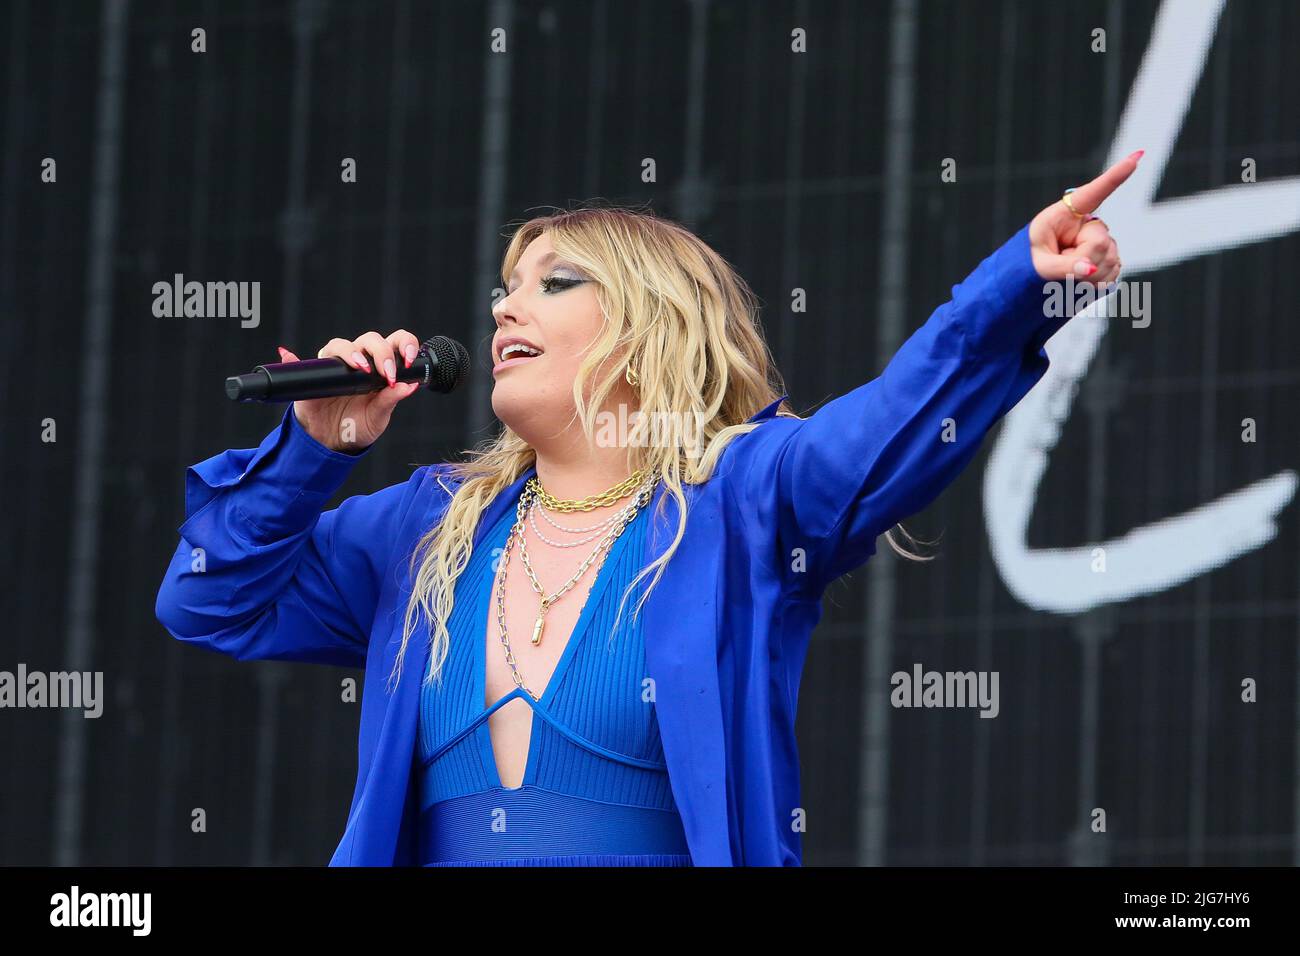 Glasgow, UK. 08th July, 2022. ELLA HENDERSON, famous singer with family connections to Scotland played at TRNSMT music festival, Glasgow Green, Glasgow, Scotland, UK. The festival is on for three days and is expected to be a sell out with thousands of music fans attending. Credit: Findlay/Alamy Live News Stock Photo